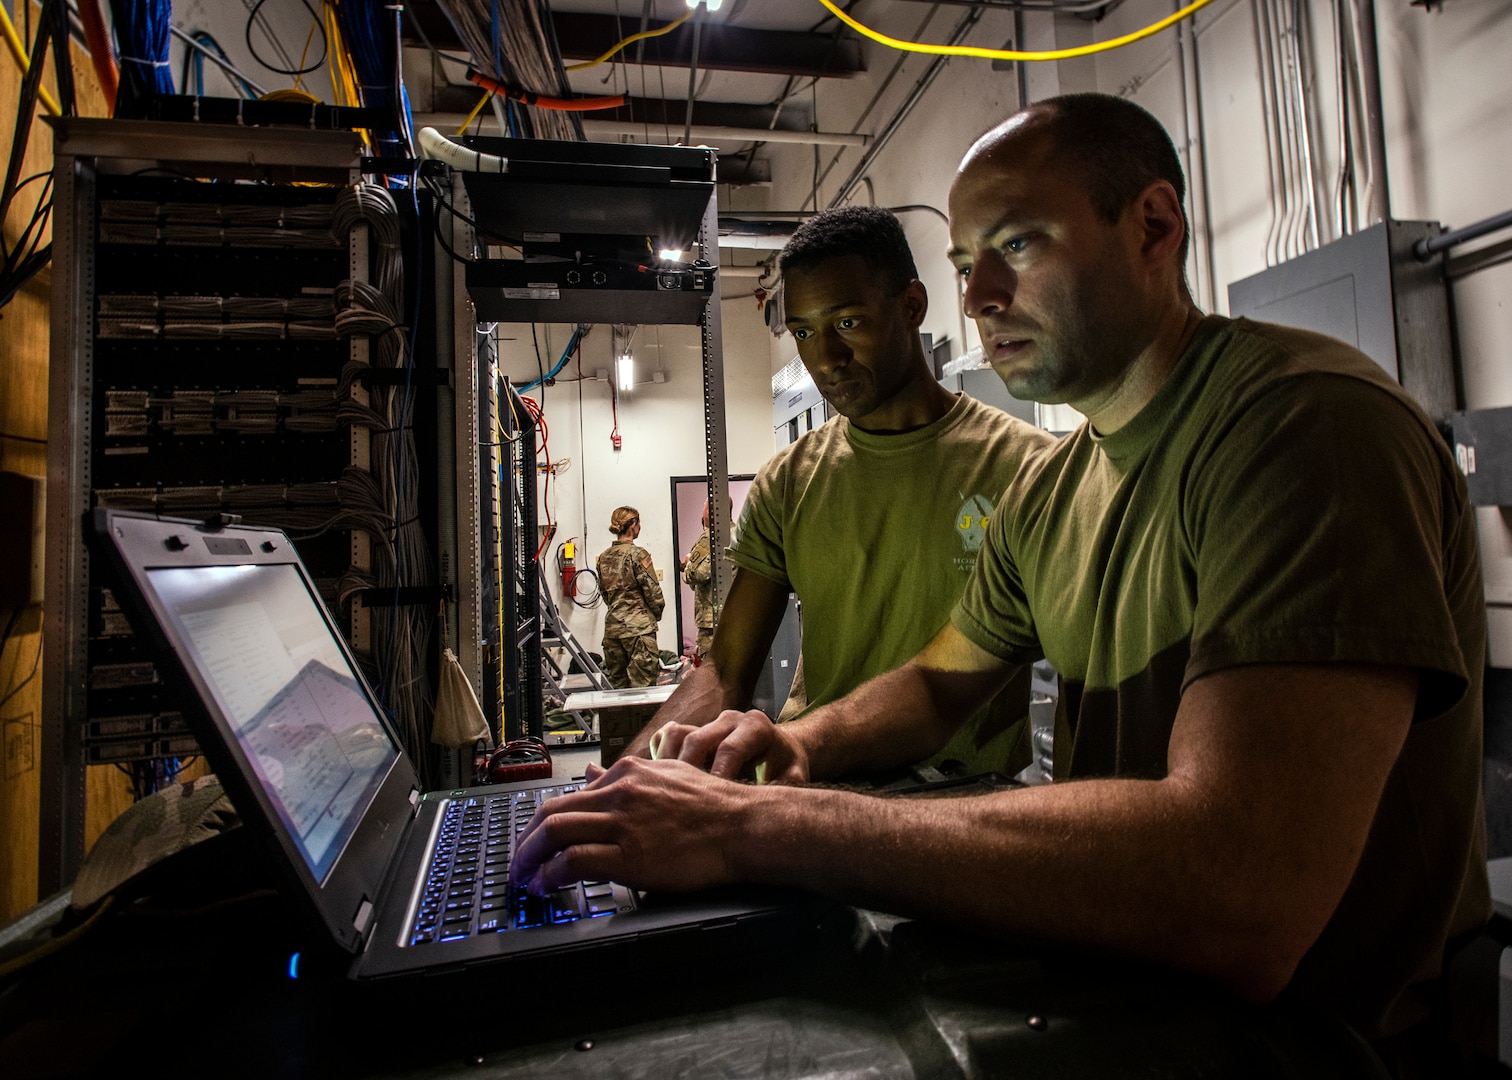 South Carolina Army National Guardsmen from 228th Signal Brigade out of Spartanburg, South Carolina, set up Joint Incident Site Command Center package to support Horry County Emergency Operations Center with back-up communications system, September 15, 2018 (U.S. Army National Guard/Brian Calhoun)